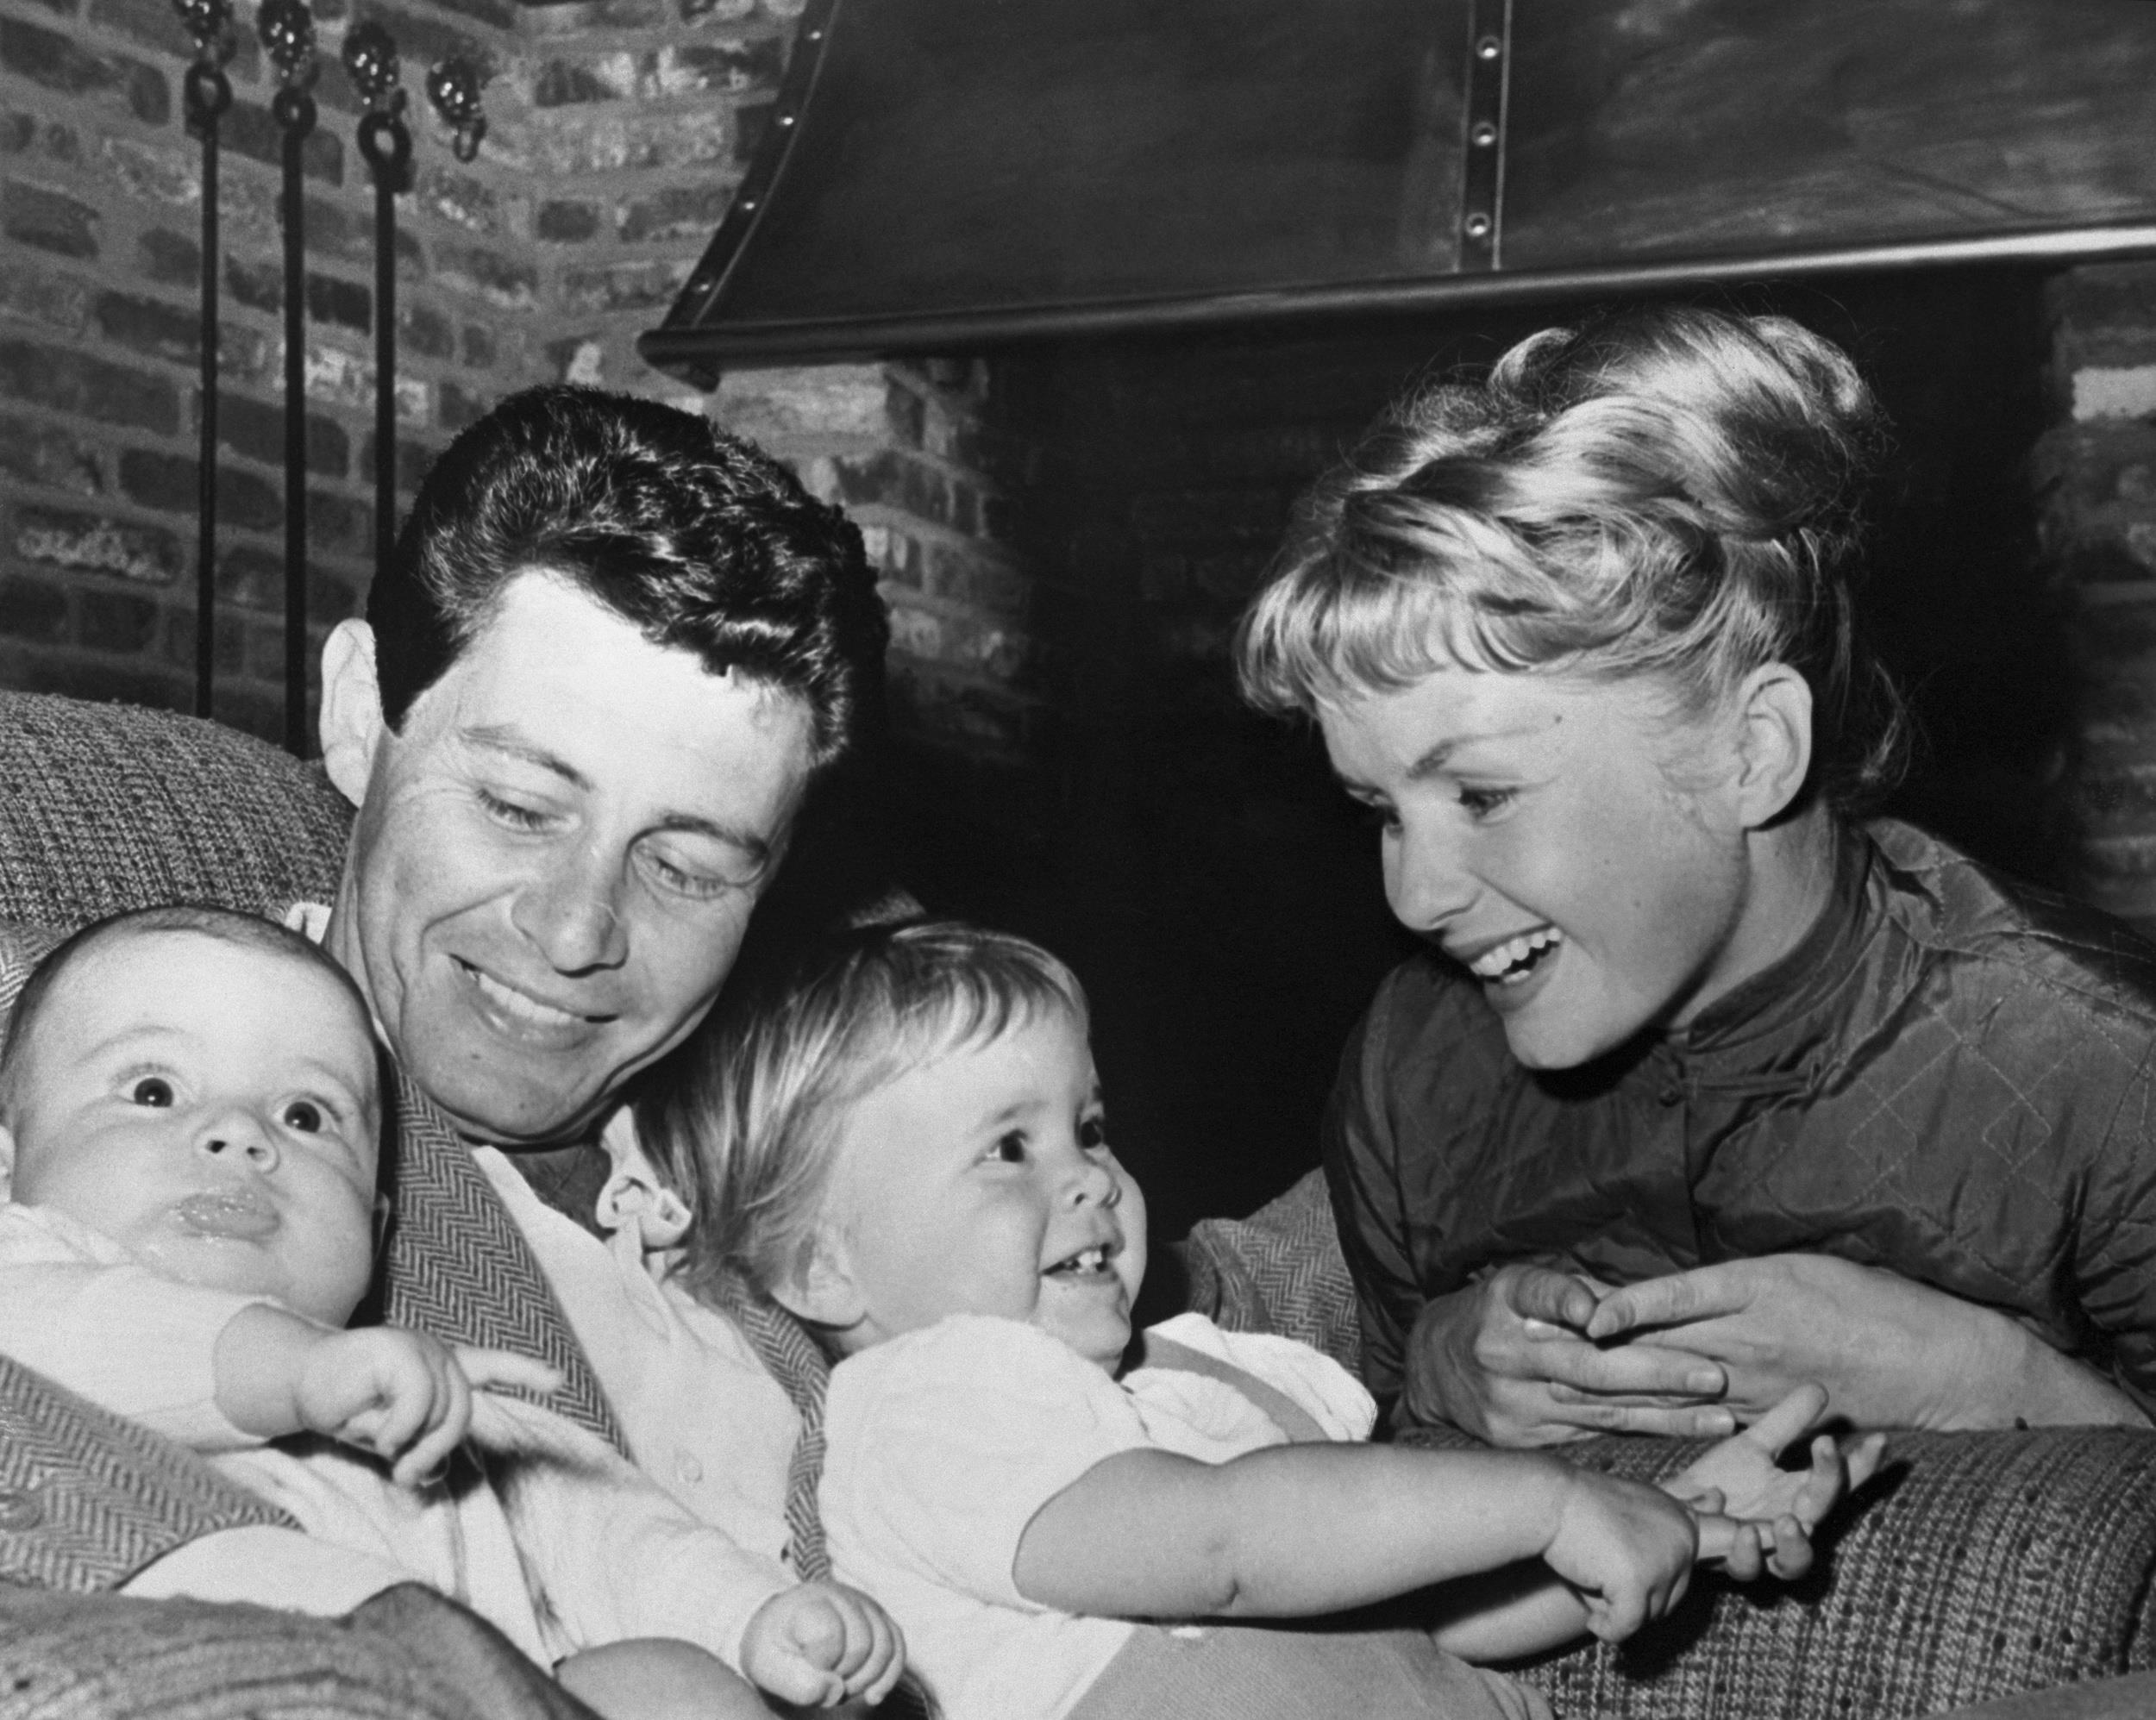 <p>Singer-actor Eddie Fisher's marriages to actresses Debbie Reynolds (<em>Three Little Words</em>, The <em>Unsinkable Molly Brown</em>) and Connie Stevens produced two prominent Hollywood actresses. The late Carrie Fisher, daughter of Reynolds, will always be remembered and adored as Princess Leia. Joely Fisher (<em>Ellen, Last Man Standing</em>), daughter of Stevens, has also enjoyed her own successful acting career. Billie Lourd, Carrie Fisher's daughter, has acted in <em>Booksmart </em>(2019), <em>American Horror Story </em>(2017-22), and <em>Ticket to Paradise </em>(2022).</p><p><a href='https://www.msn.com/en-us/community/channel/vid-cj9pqbr0vn9in2b6ddcd8sfgpfq6x6utp44fssrv6mc2gtybw0us'>Follow us on MSN to see more of our exclusive entertainment content.</a></p>